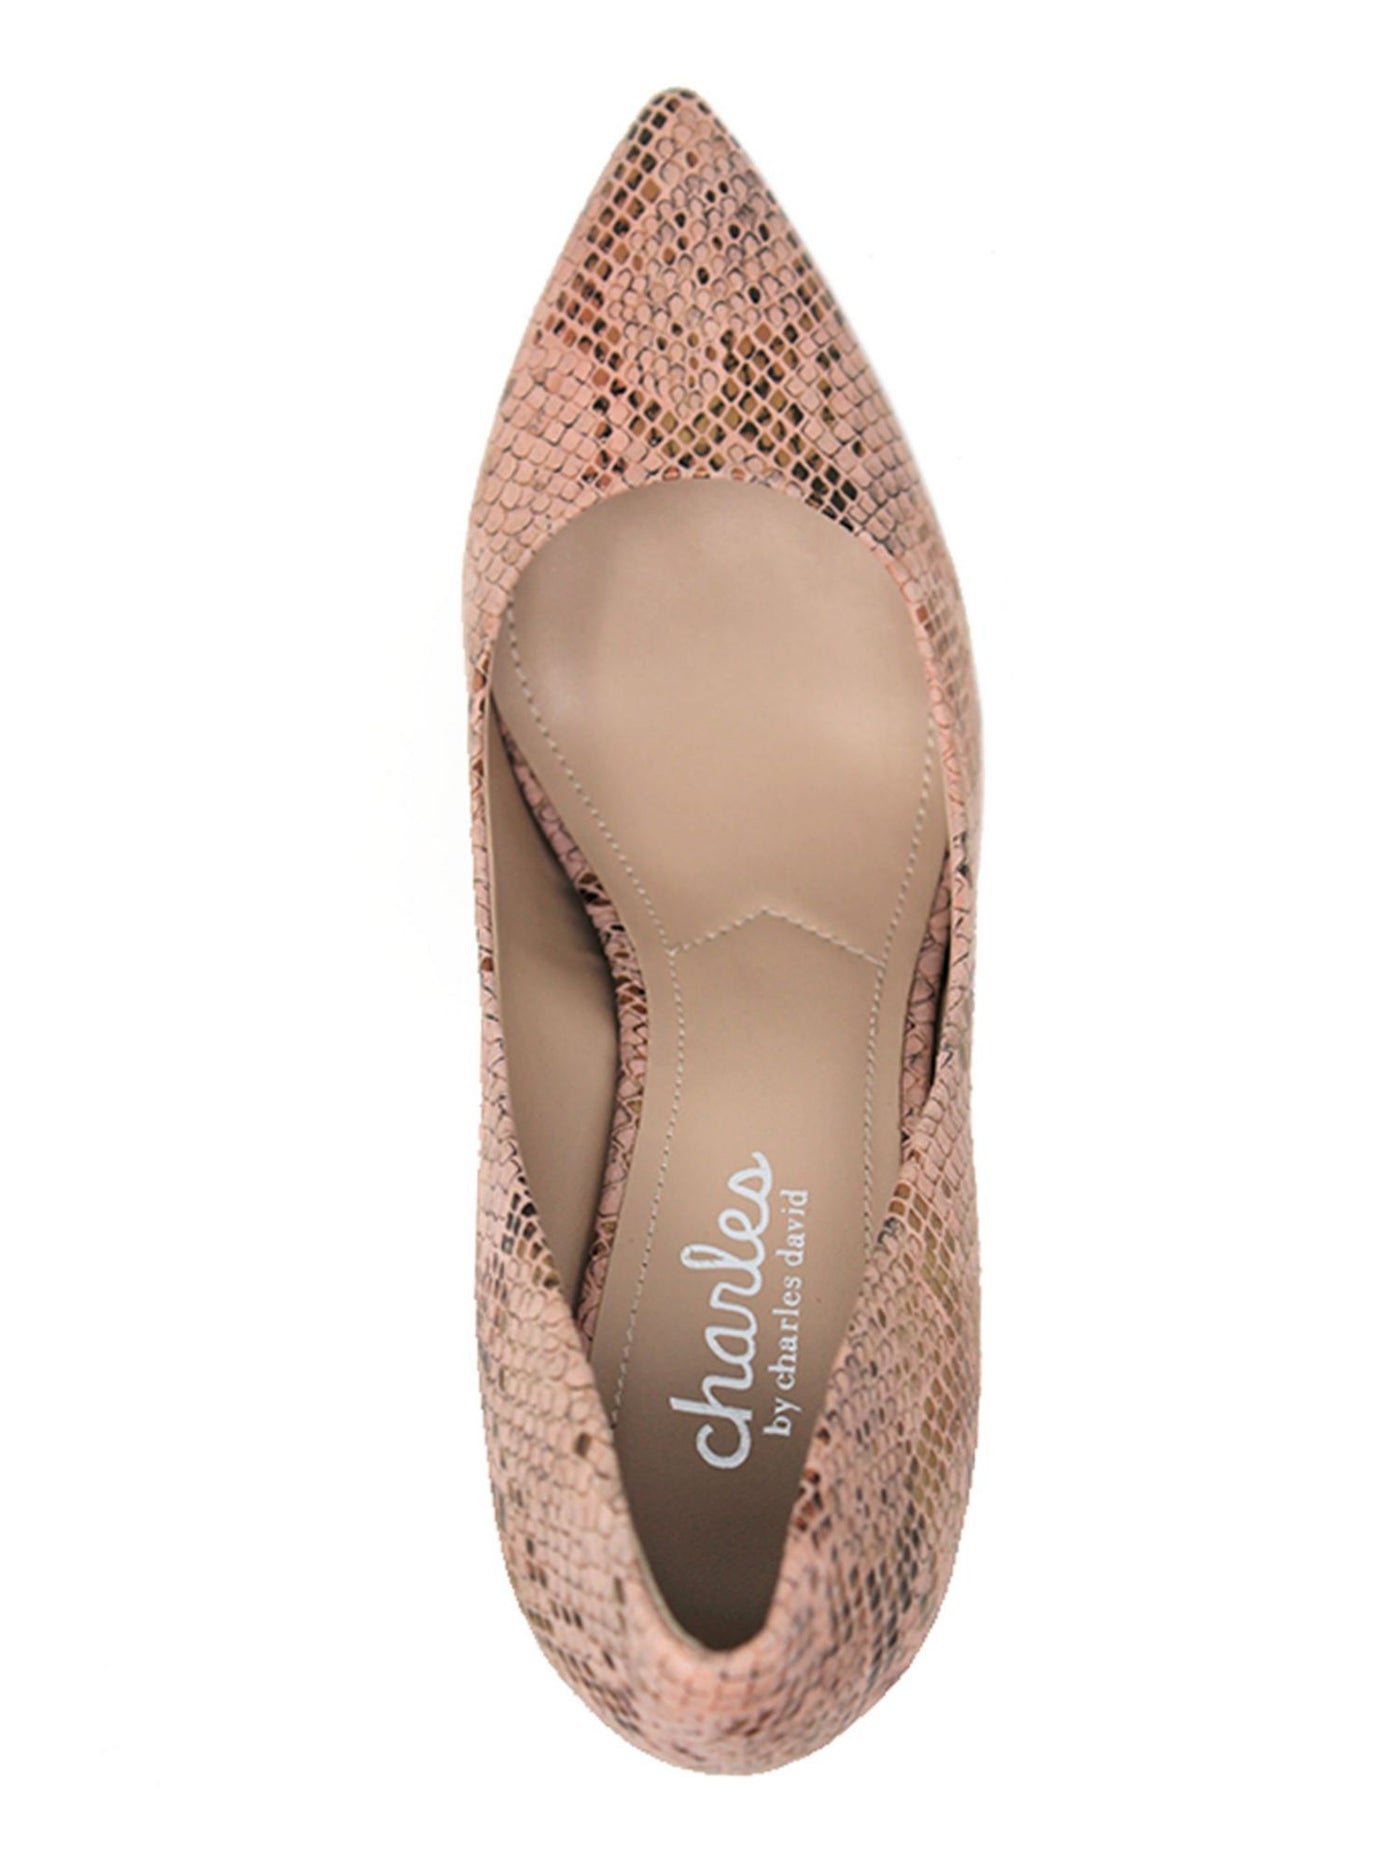 CHARLES BY CHARLES DAVID Womens Pink Snake Print Comfort Maxx Pointed Toe Stiletto Slip On Leather Pumps Shoes M